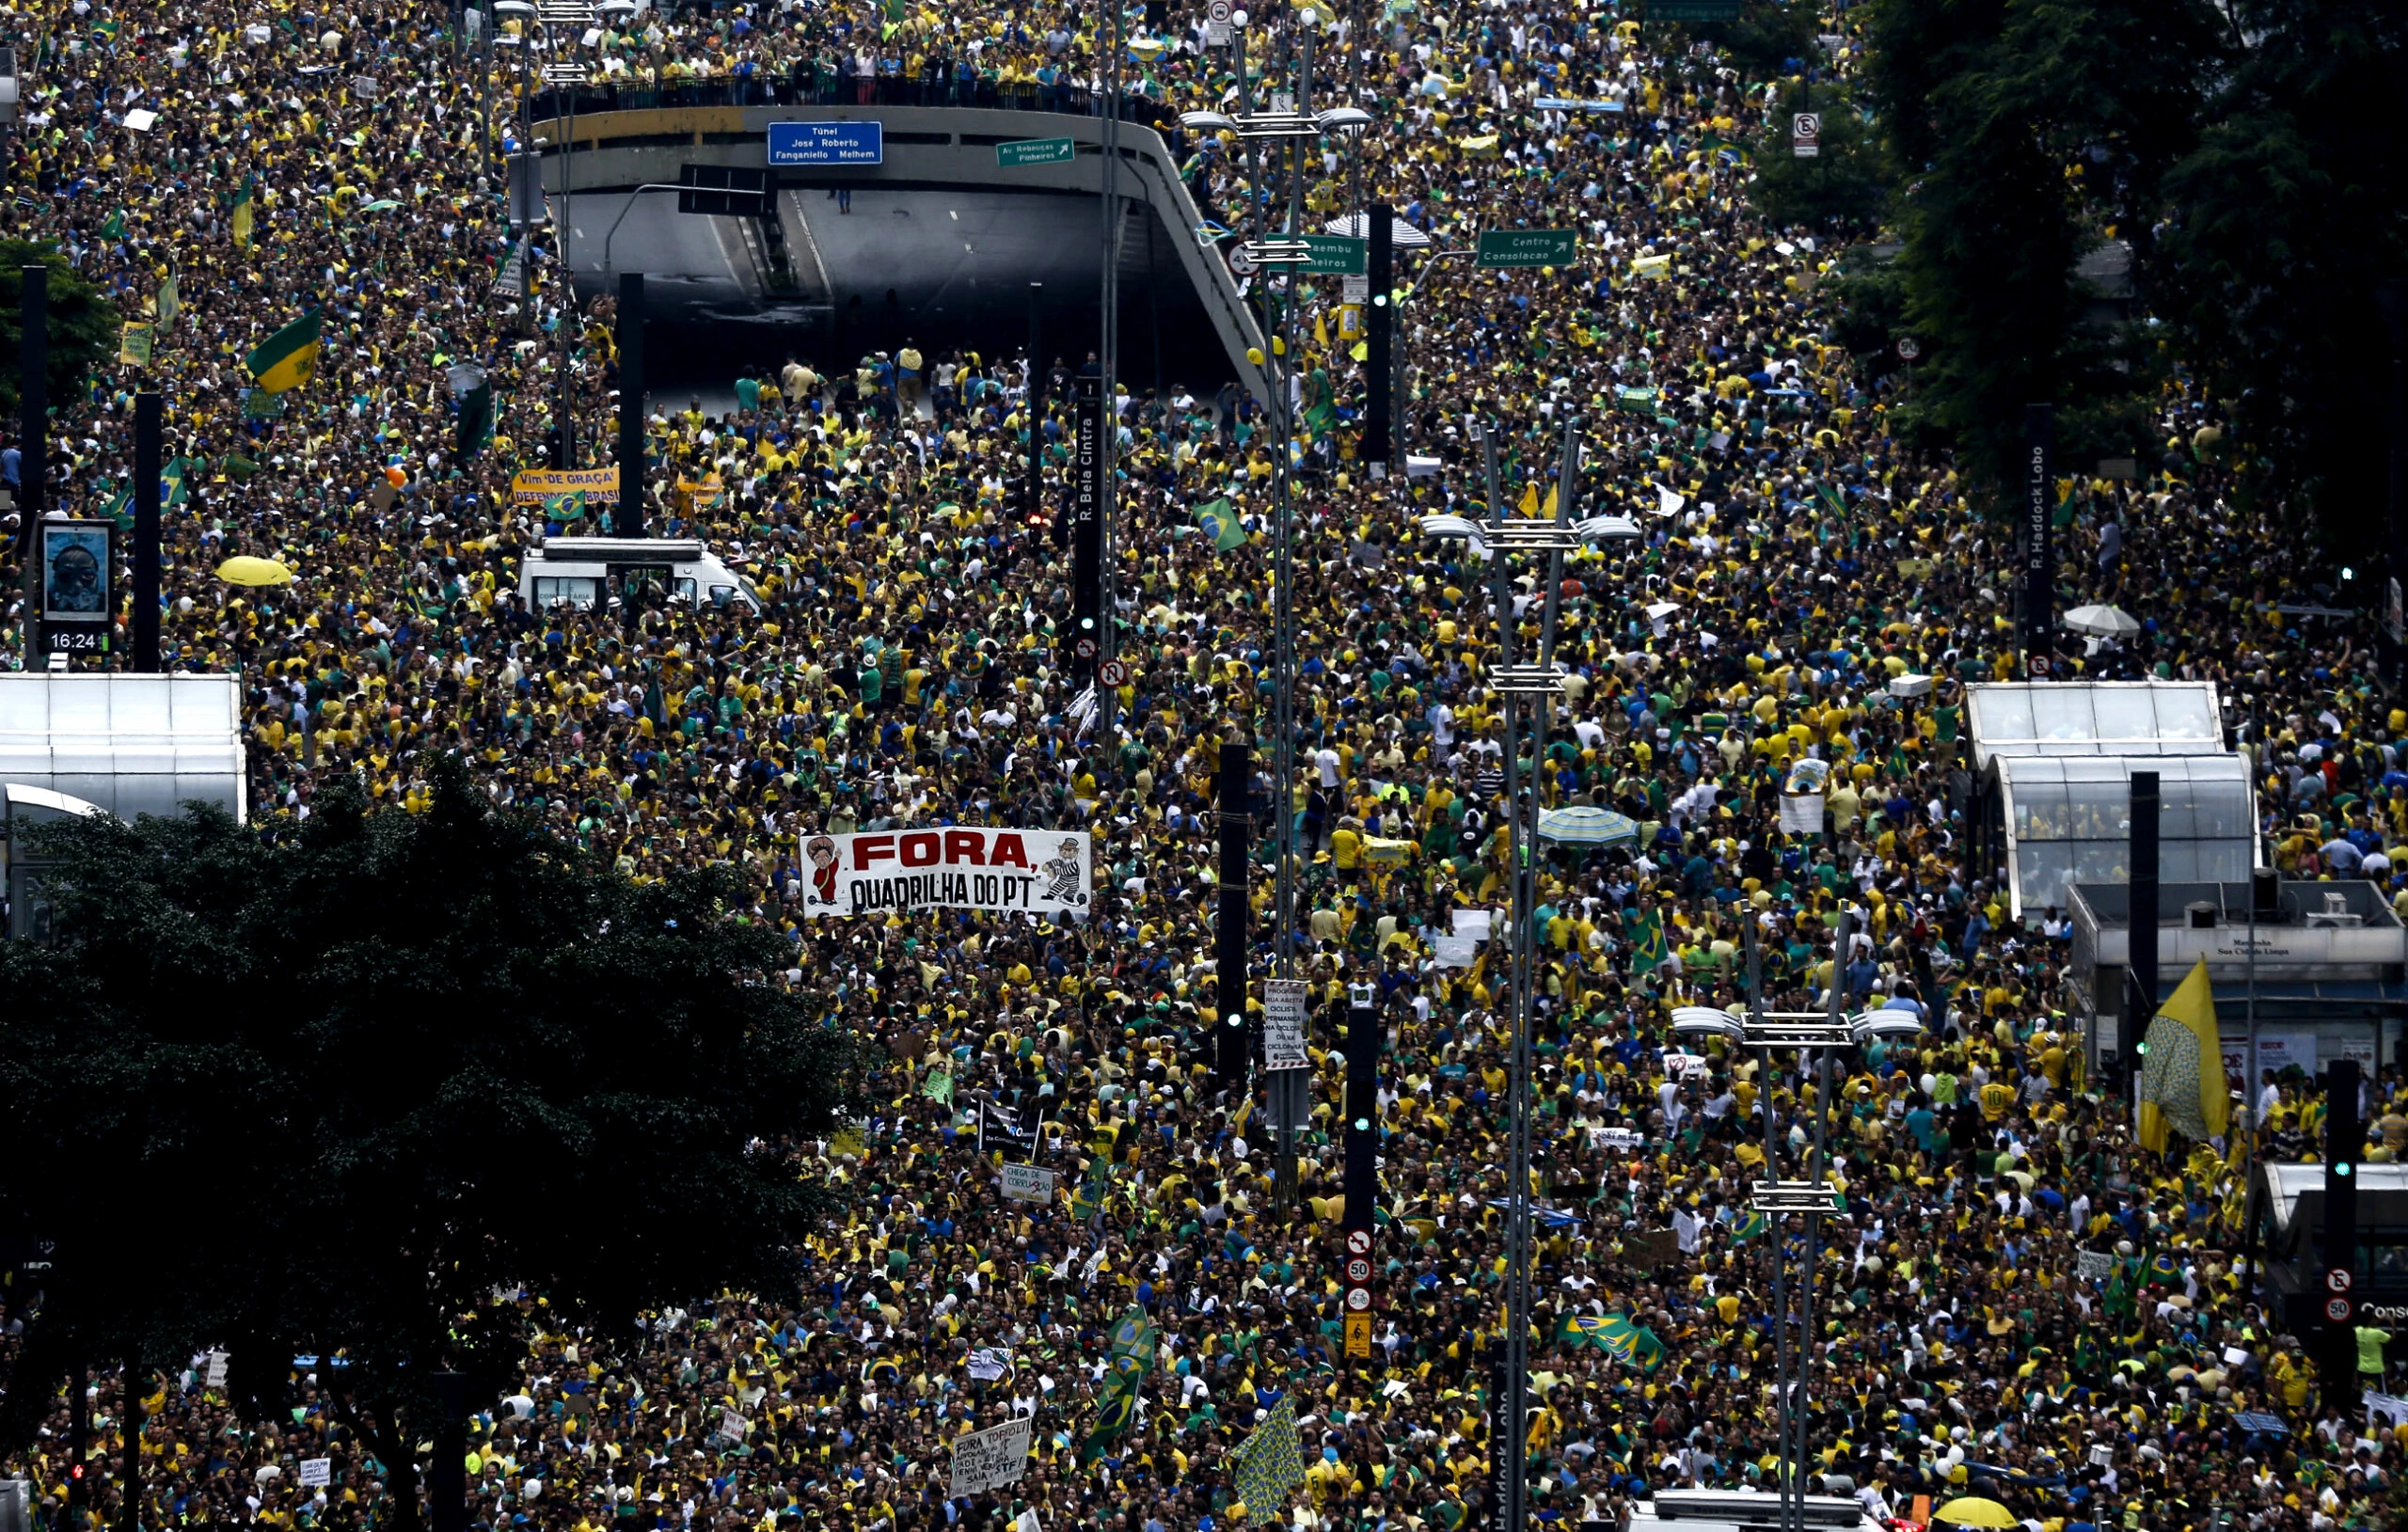 Thousands of demonstrators rally in support of the impeachment of Brazilian President Dilma Rousseff at Paulista Avenue in Sao Paulo, Brazil on March 13, 2016. Thousands of demonstrators clad in the yellow and green national flag's colors protested Sunday in several cities of Brazil to demand Rousseff's removal from office. AFP PHOTO-Miguel SCHINCARIOL / AFP / Miguel Schincariol        (Photo credit should read MIGUEL SCHINCARIOL/AFP/Getty Images)